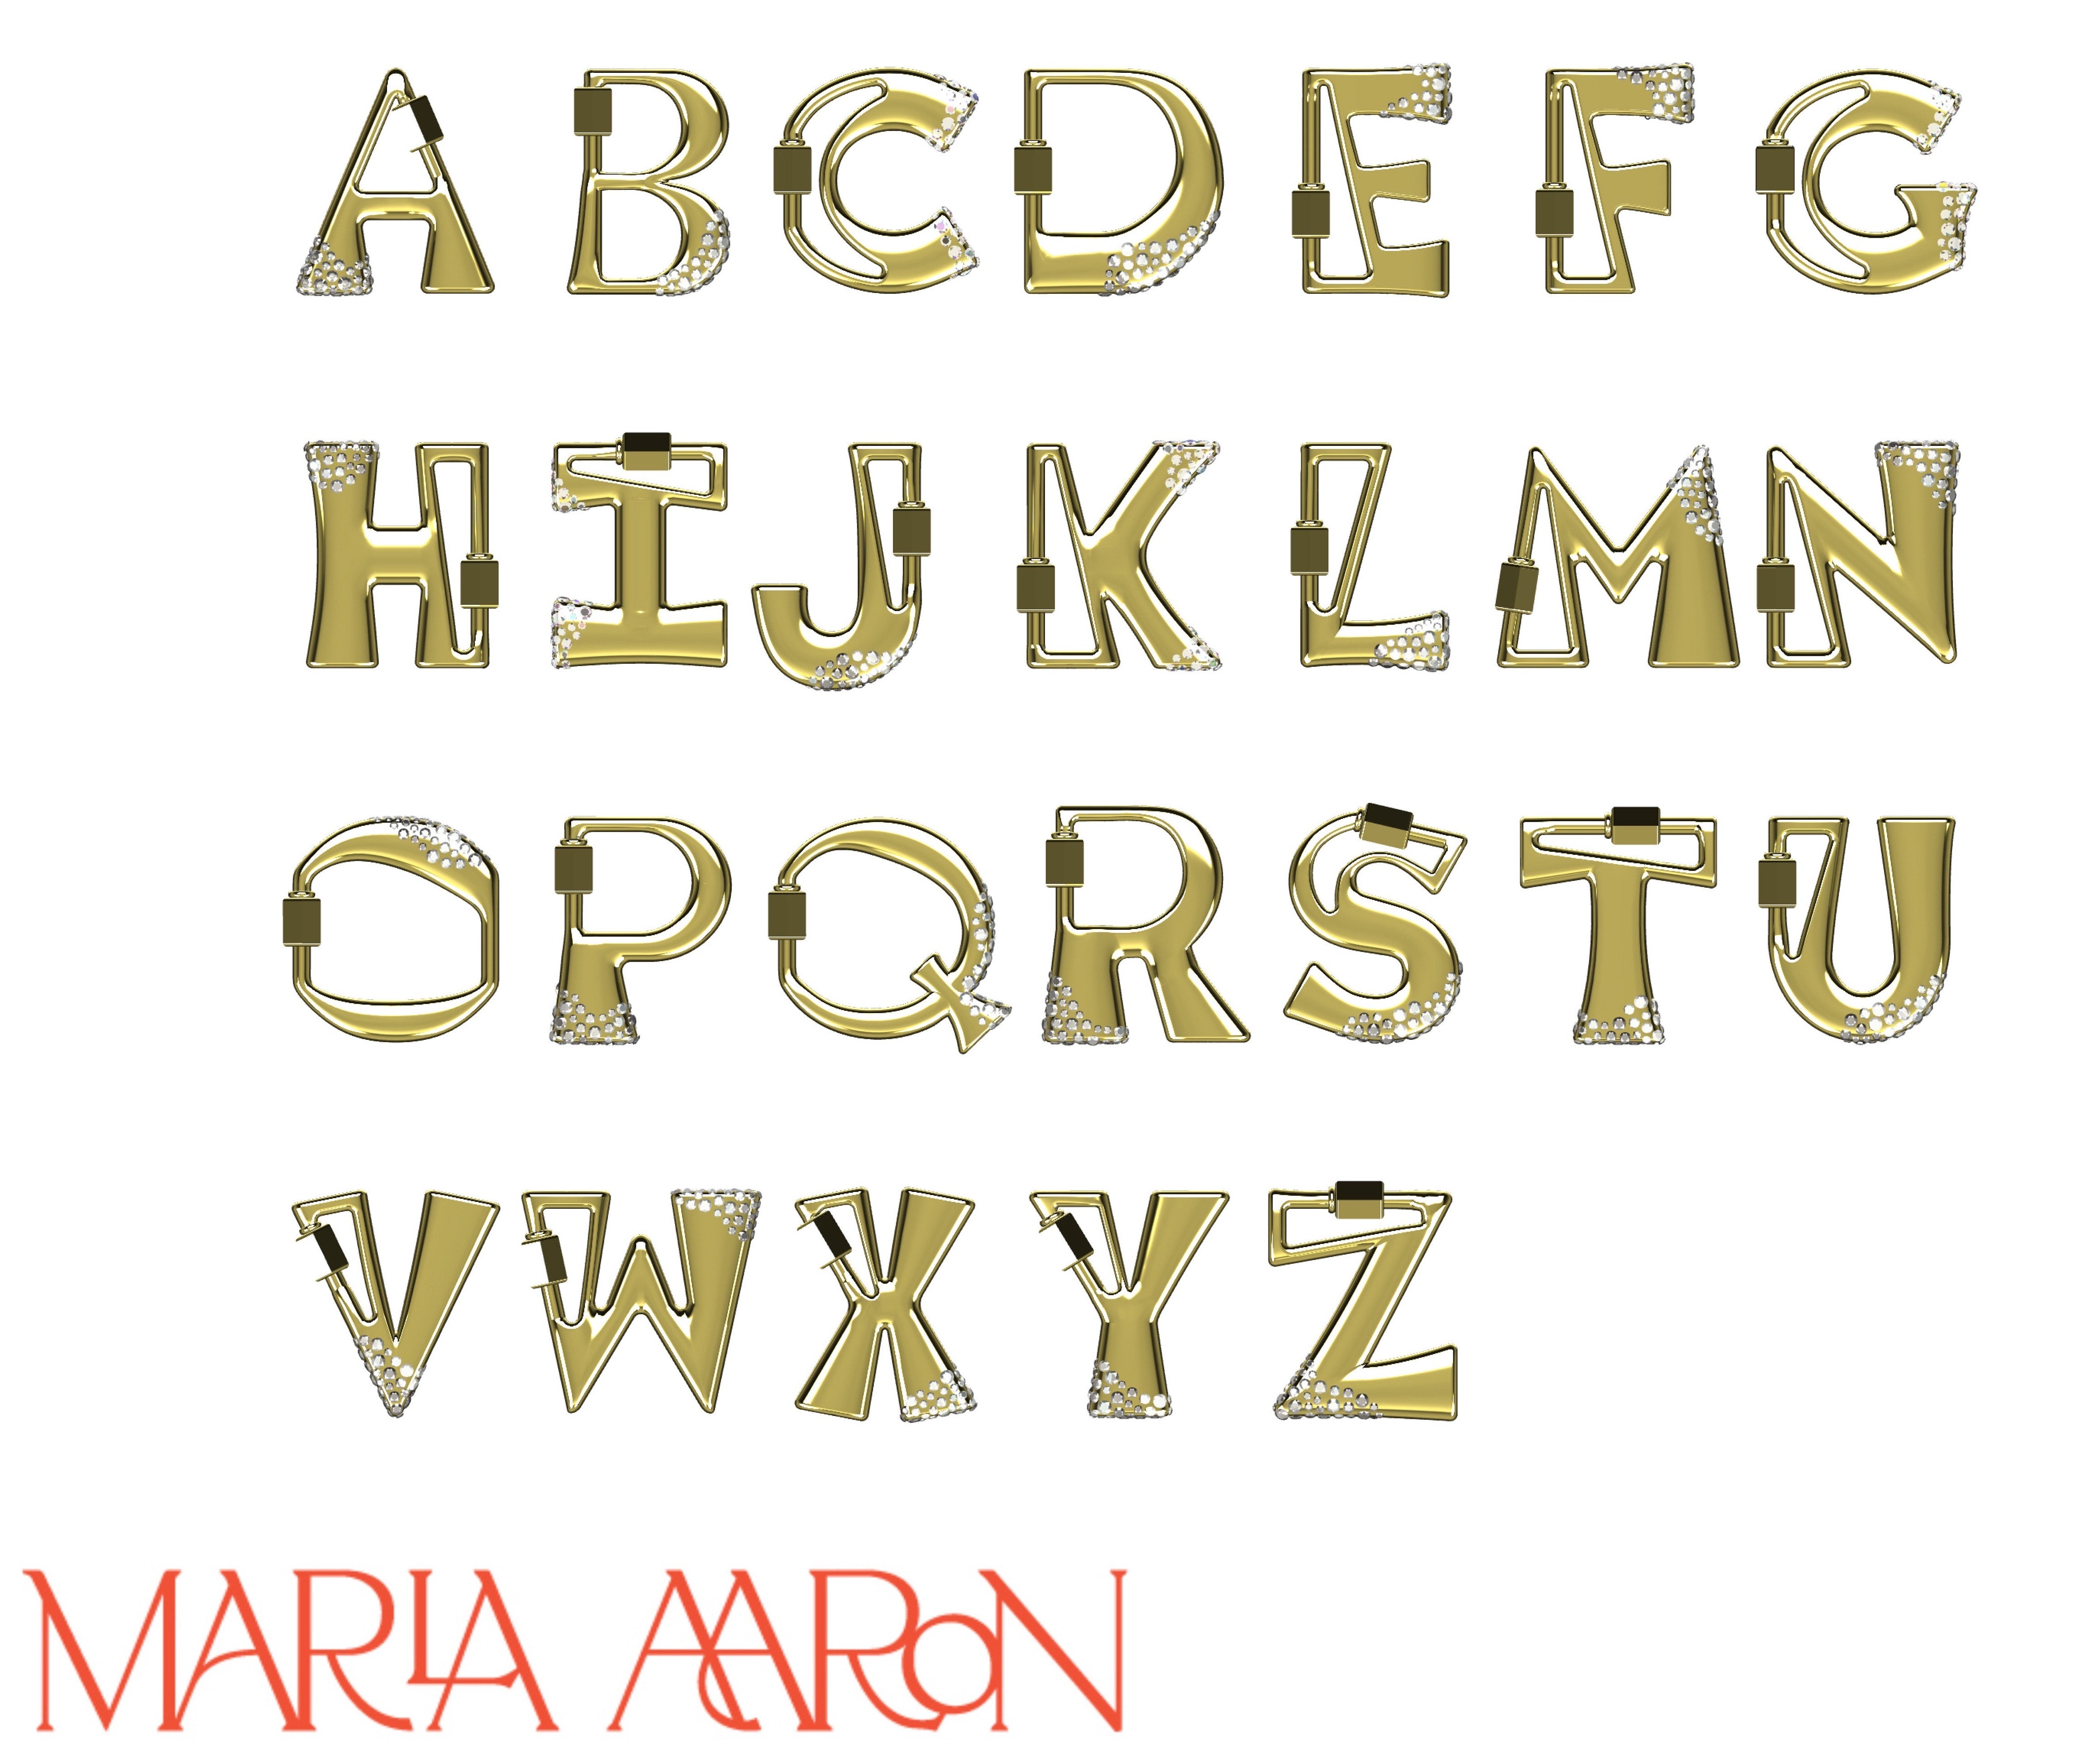 Gold locks of every letter of the alphabet including O charm against white backdrop with Marla Aaron logo in bottom left corner